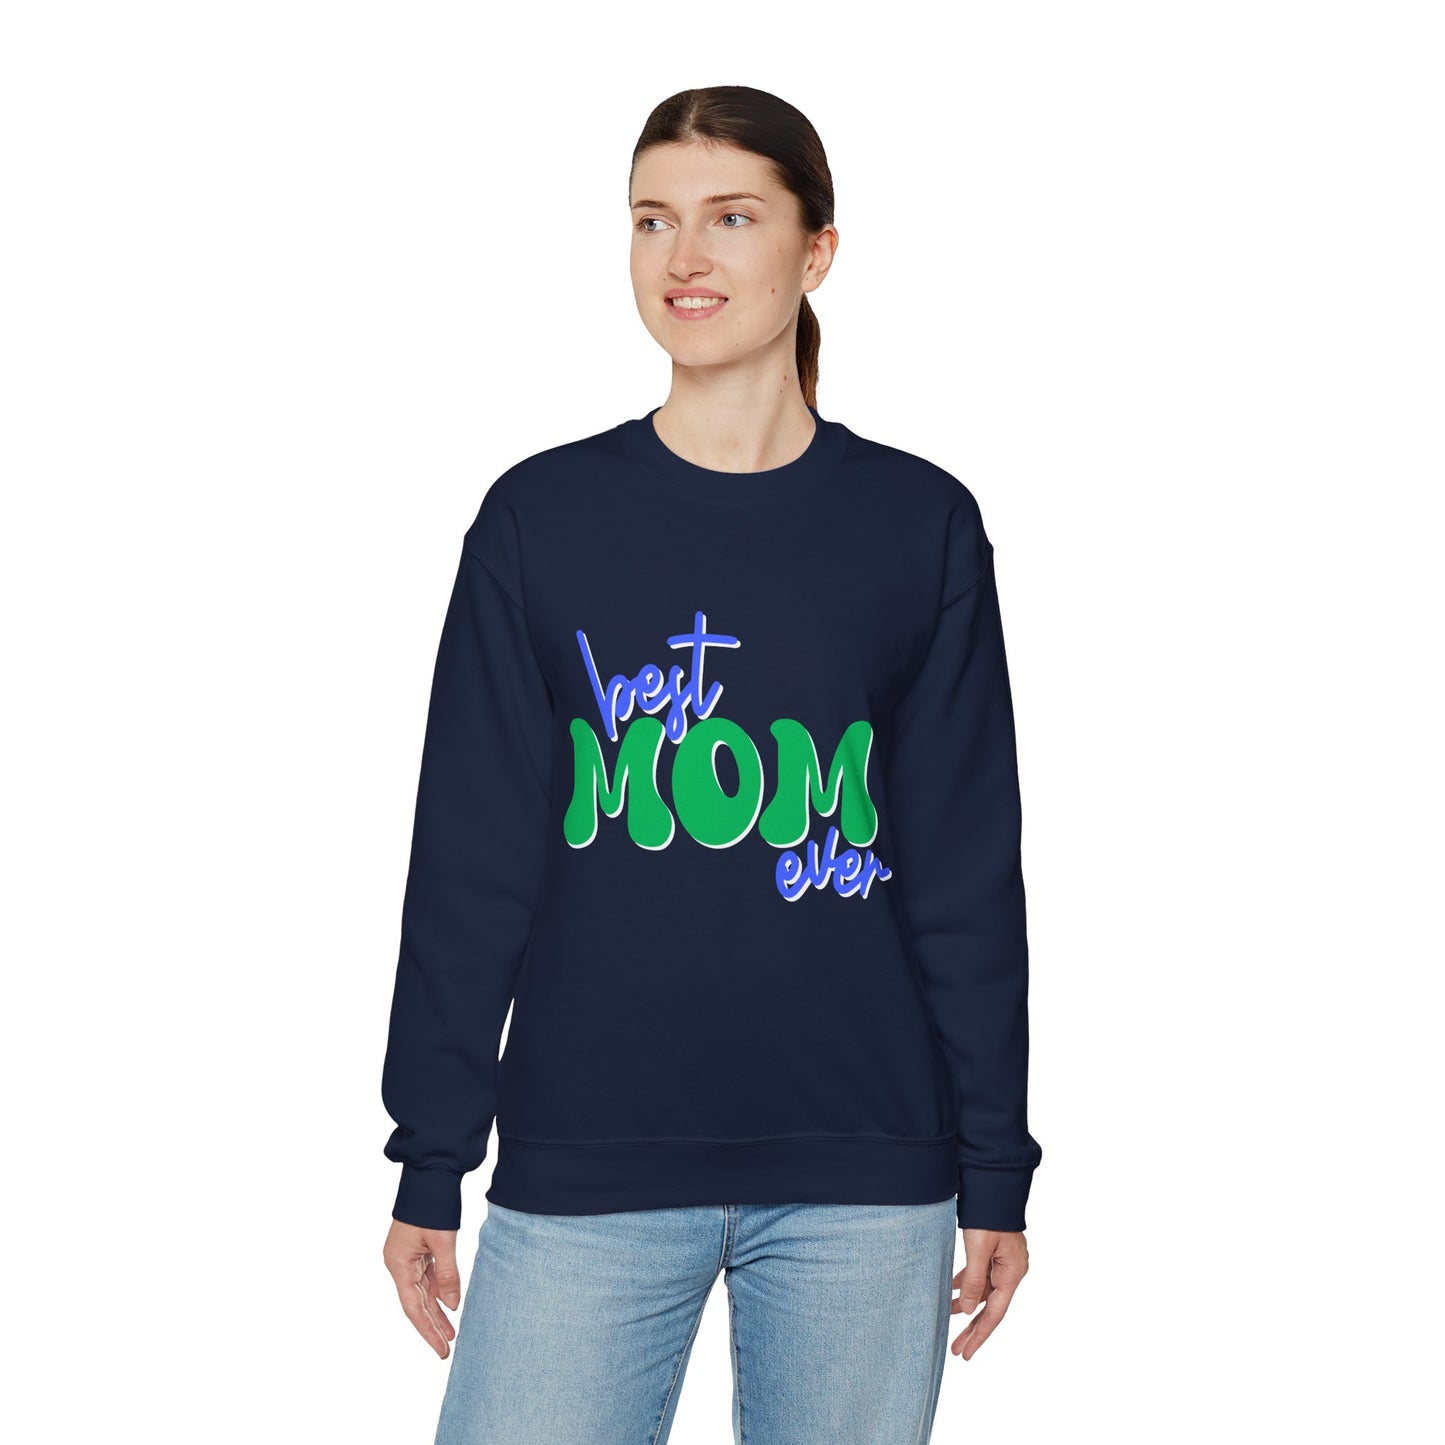 Personalized premium sweatshirt for mom, comfort and style, mother's day, gifts for mom's day, custom mama, best mom ever